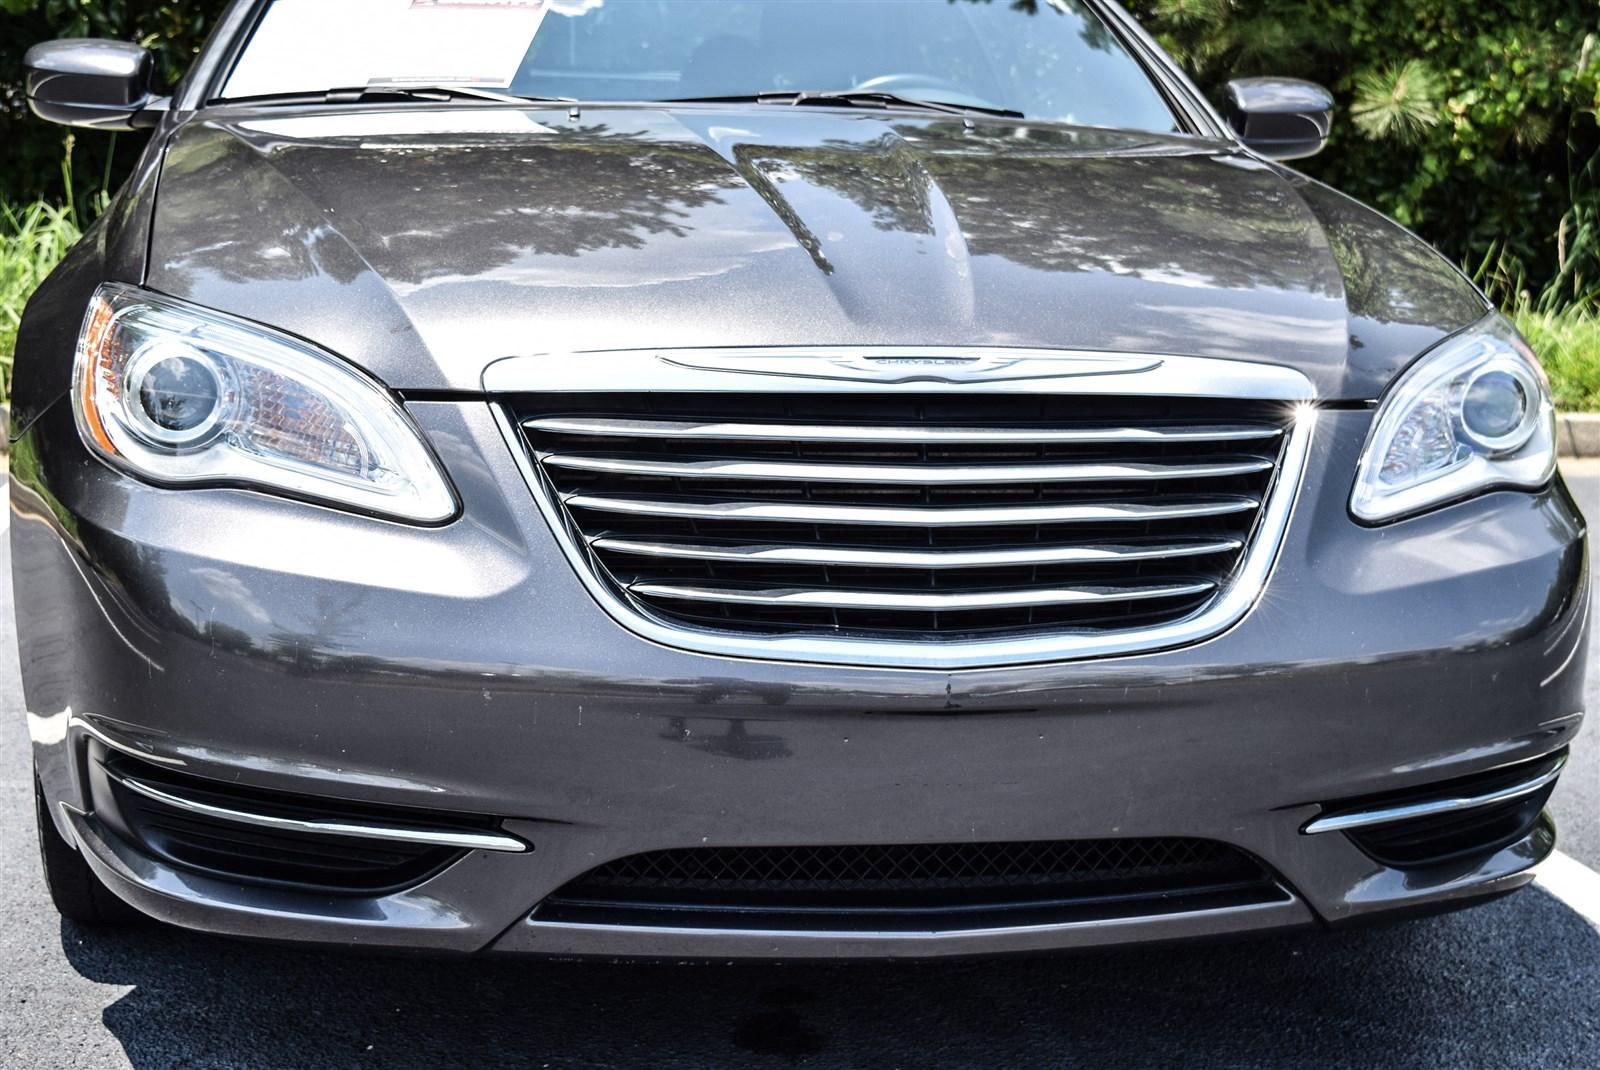 Used 2014 Chrysler 200 Touring for sale Sold at Gravity Autos Marietta in Marietta GA 30060 7